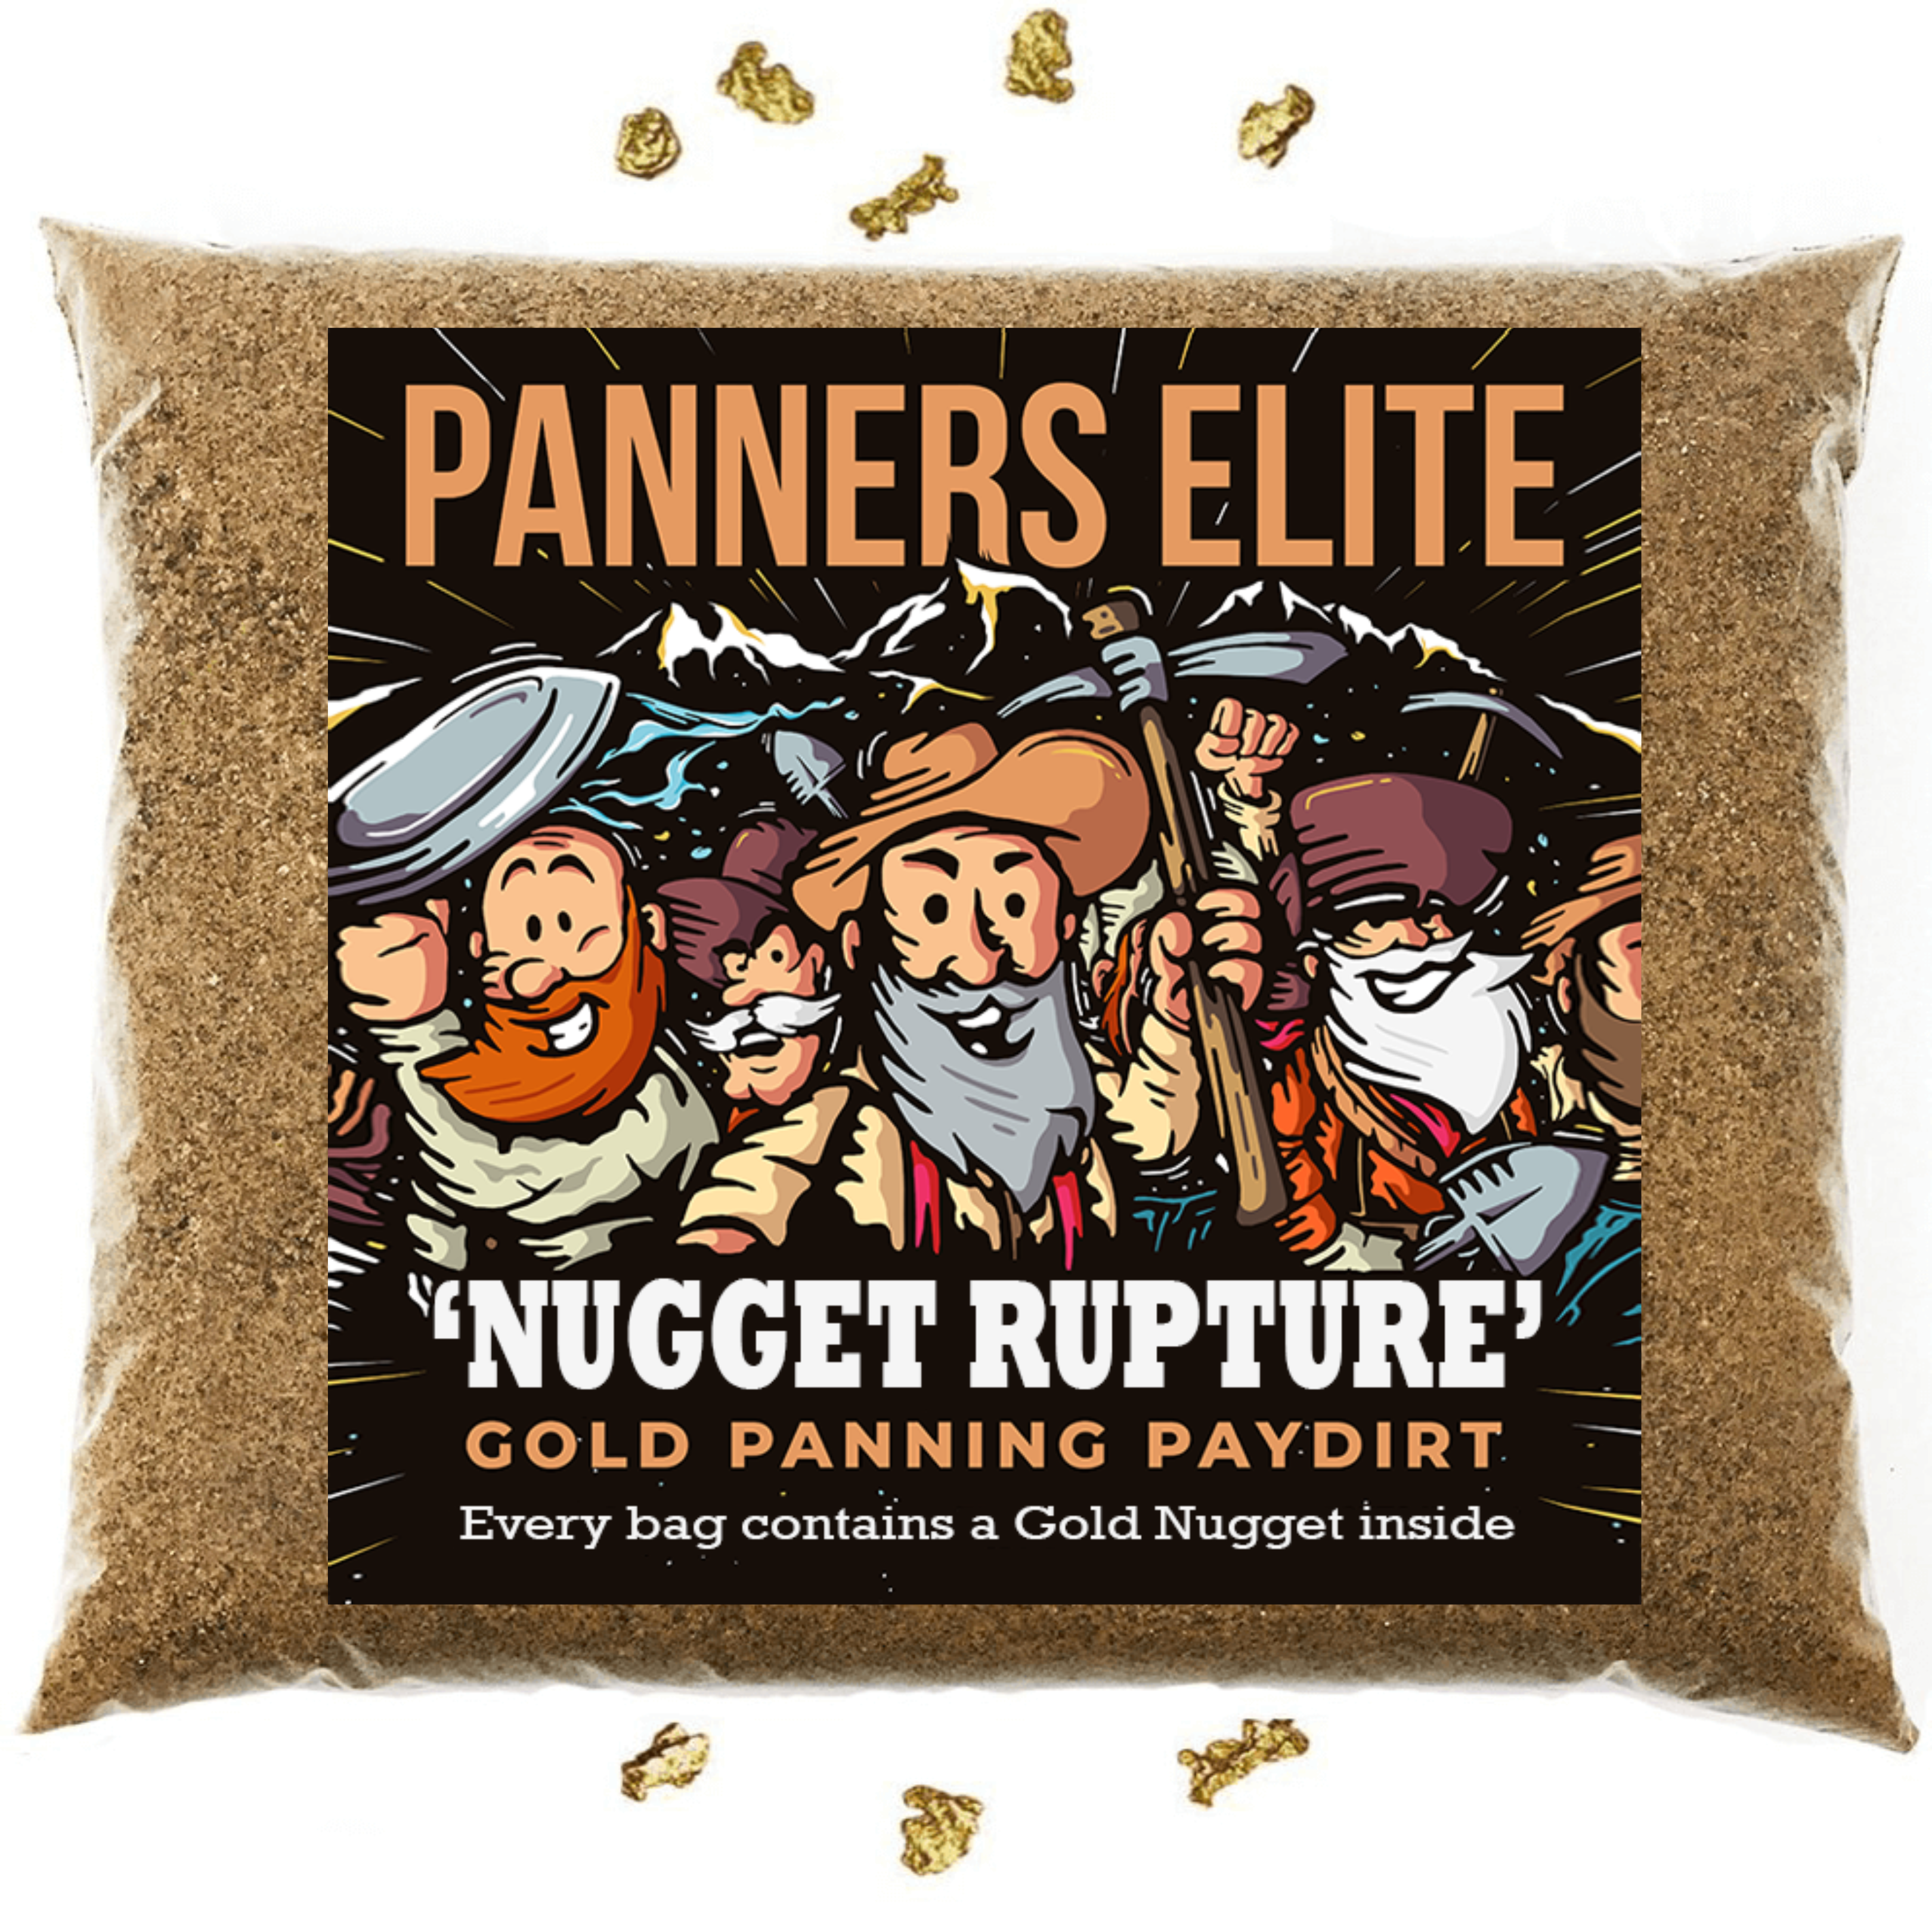 NUGGET RUPTURE - GOLD PAYDIRT